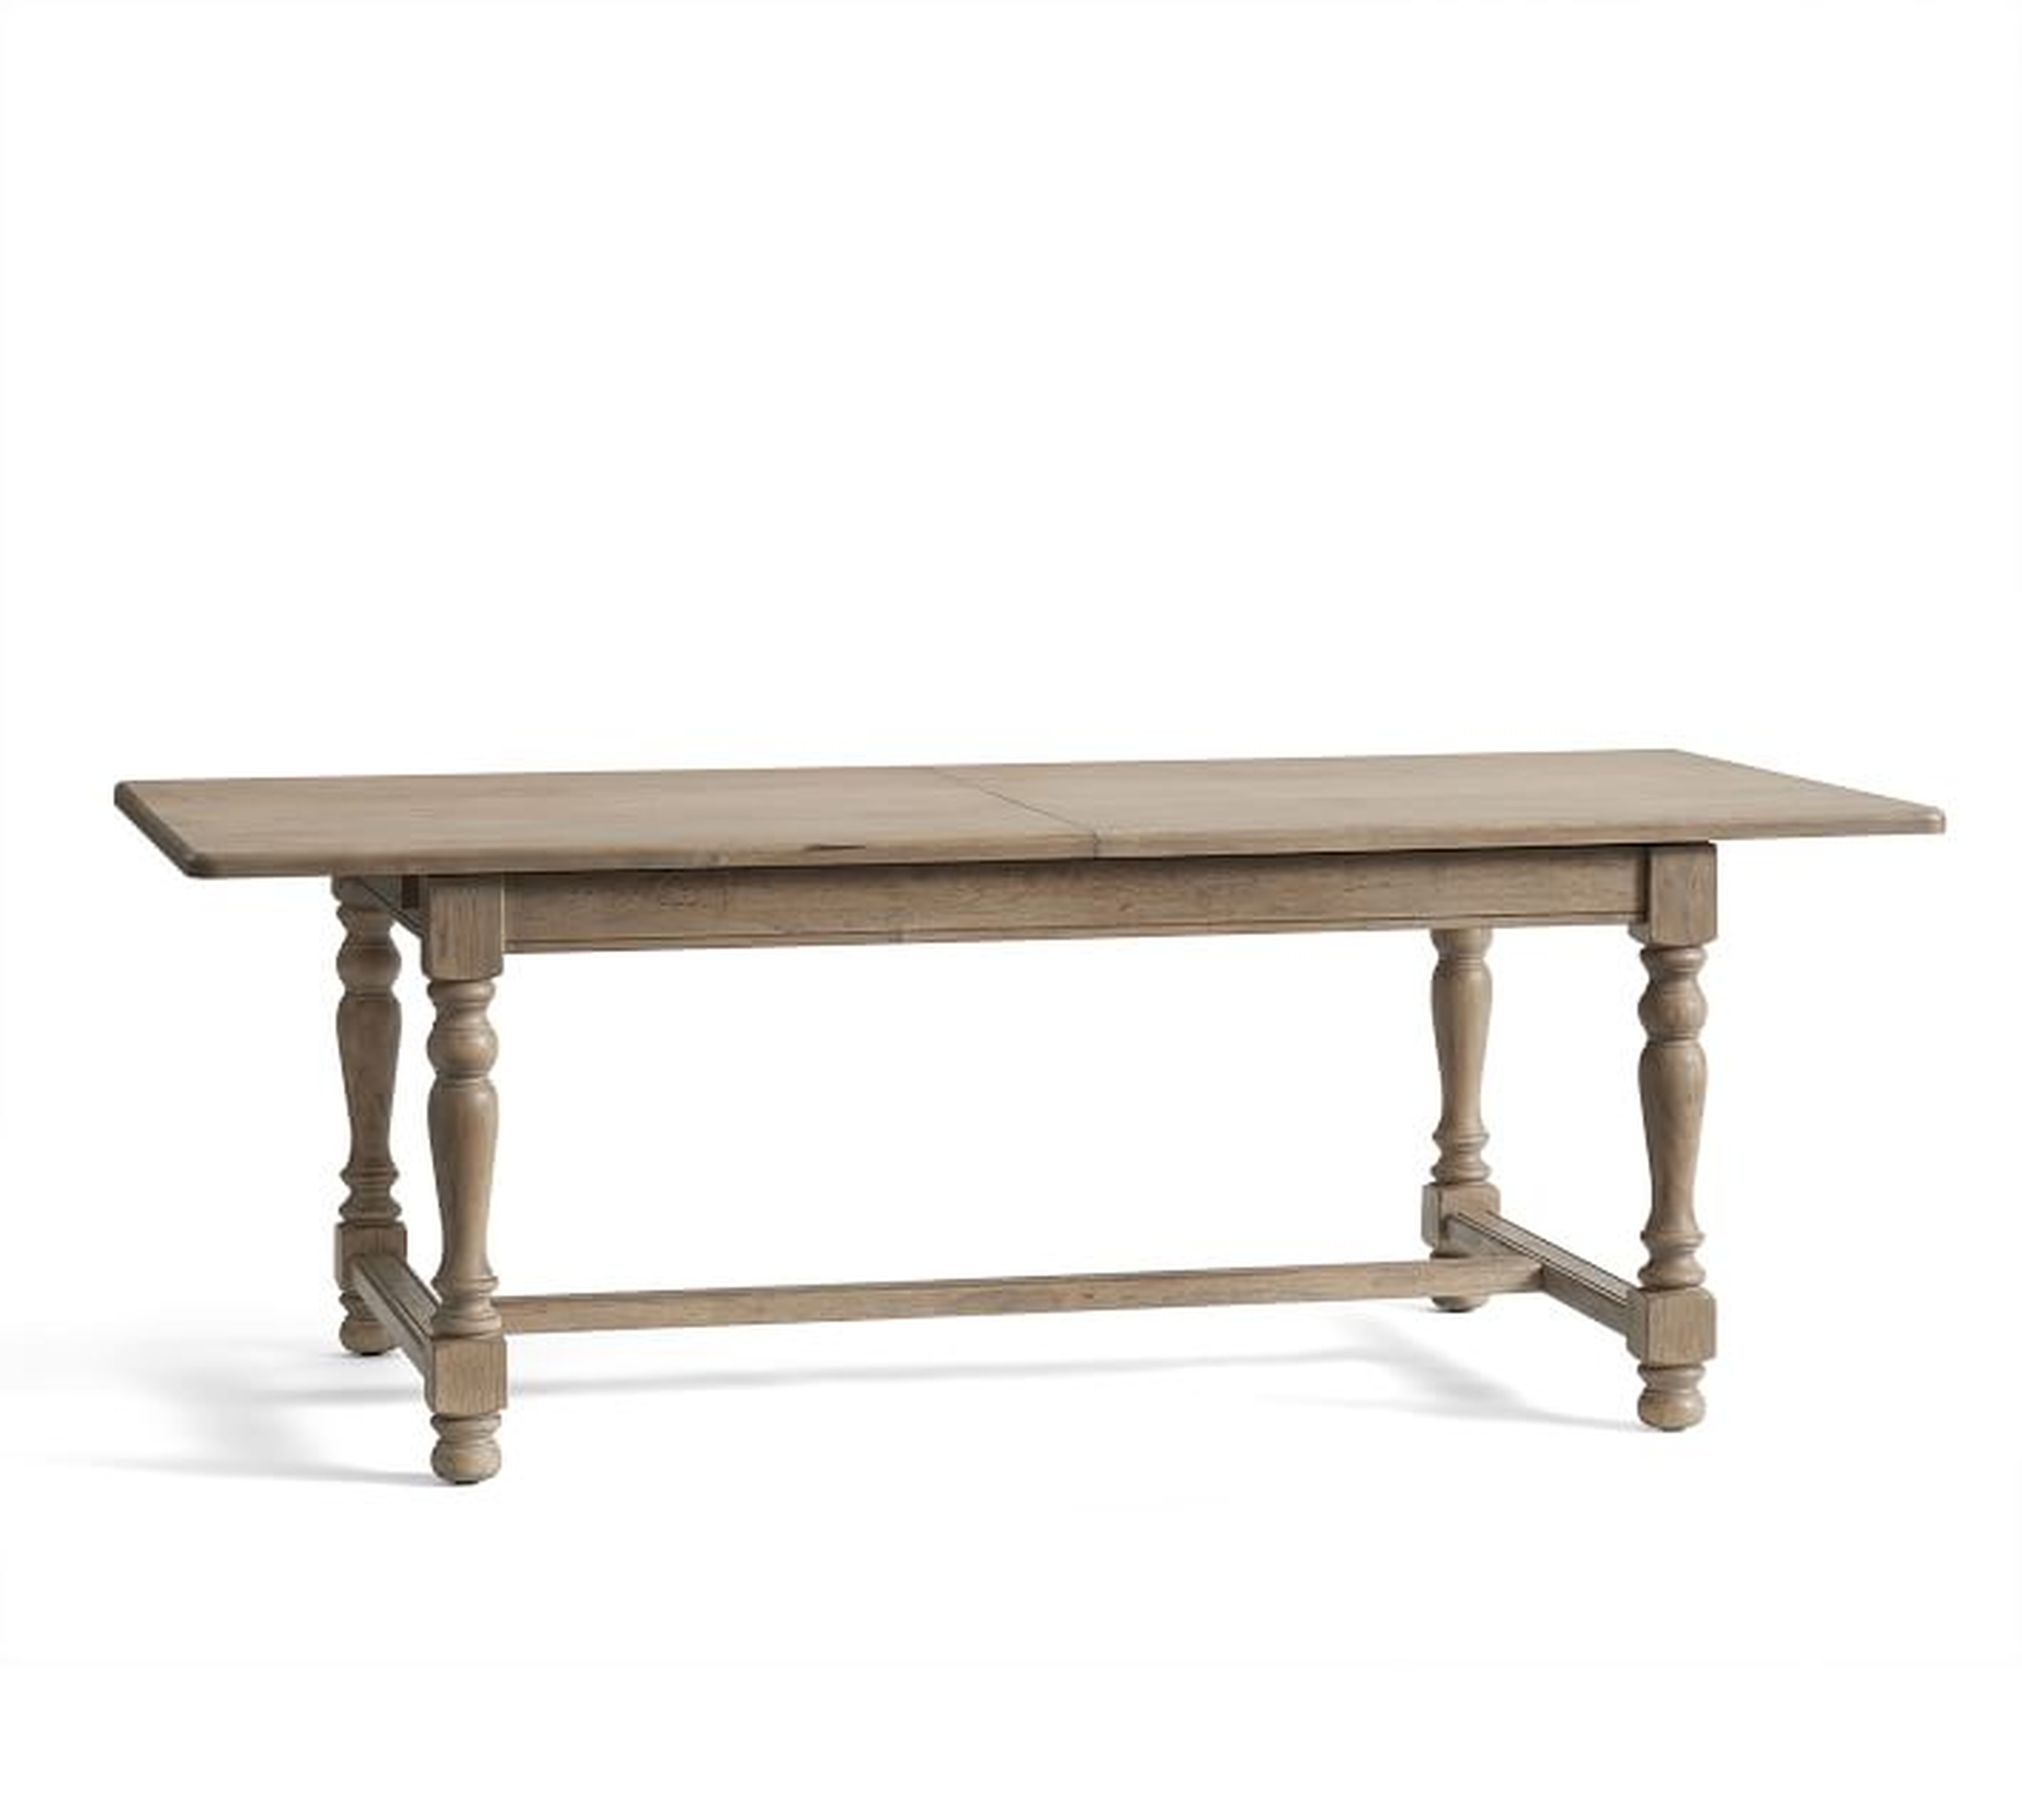 Normandy Extending Dining Table, Versaille Gray - Pottery Barn